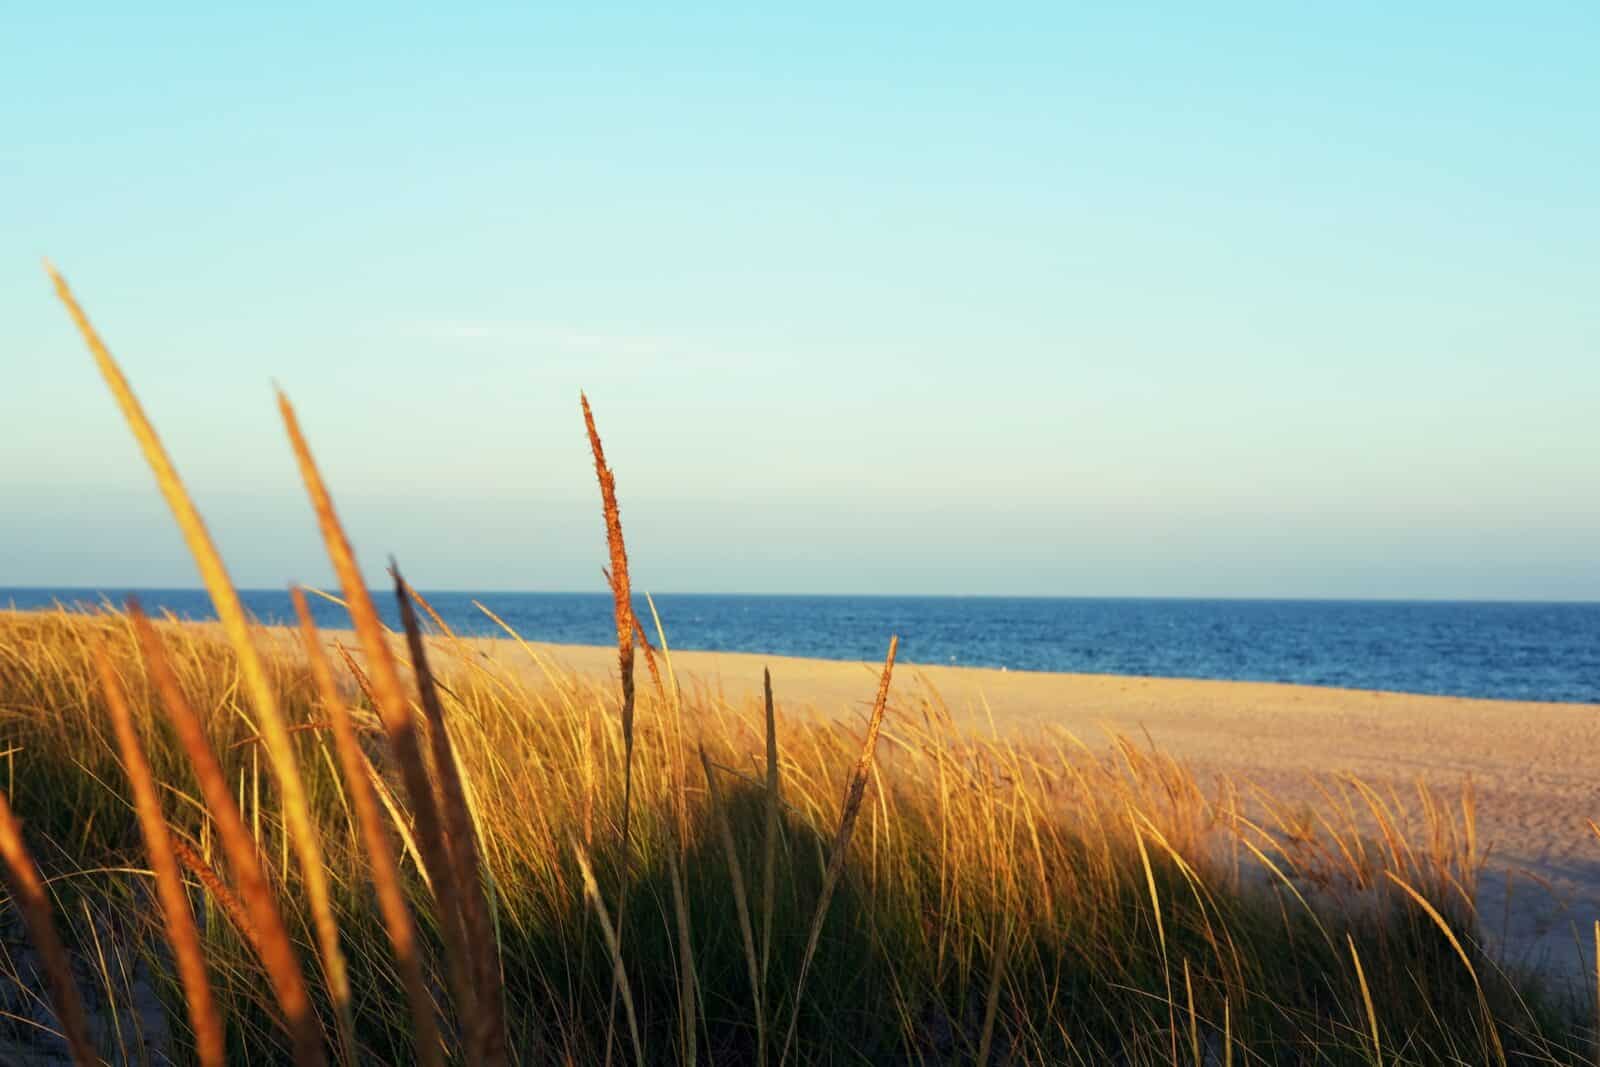 Best Areas to Stay in The Hamptons, New York